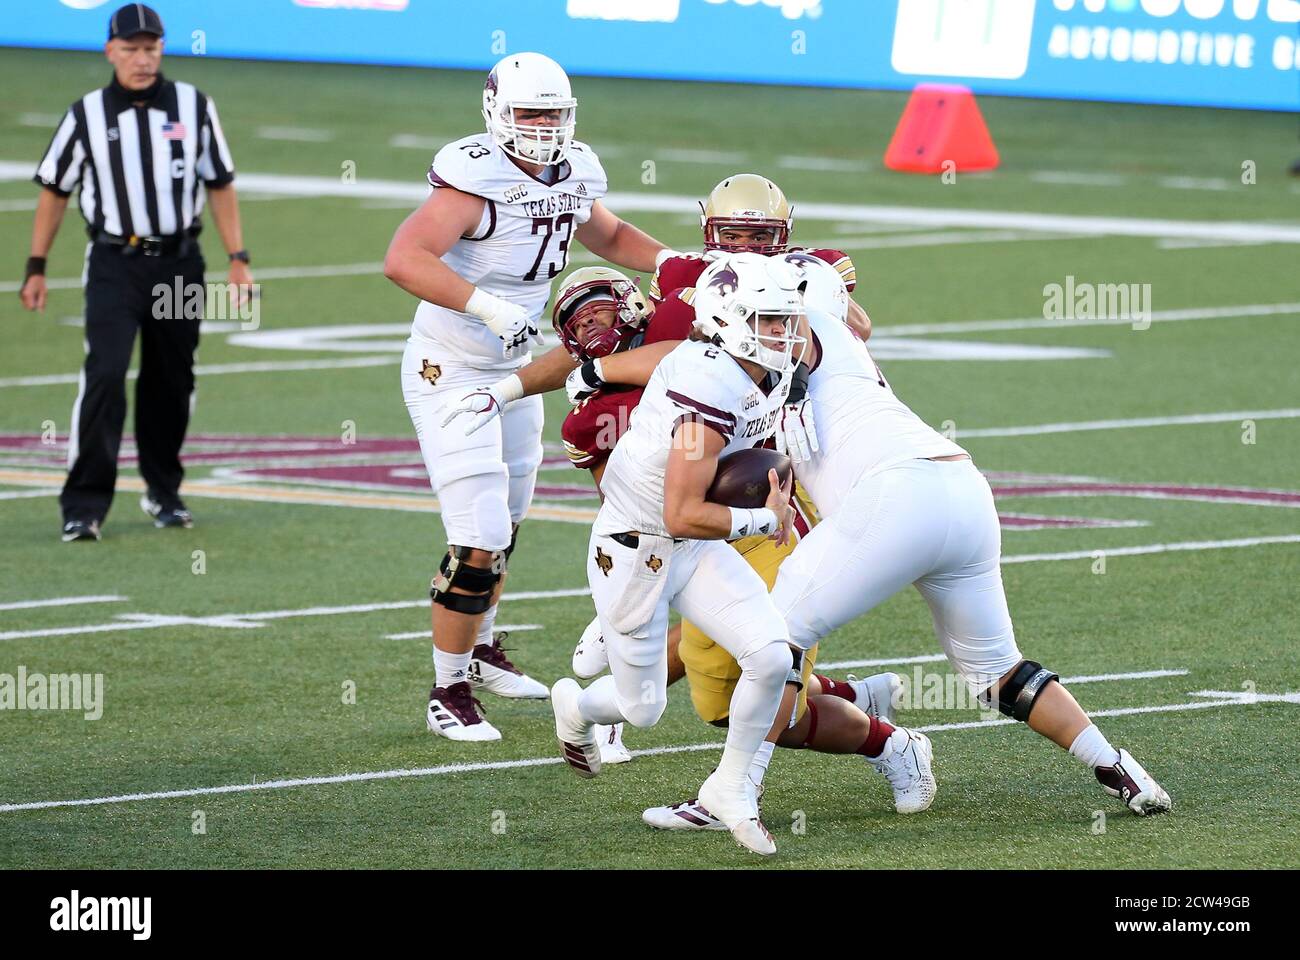 Alumni Stadium. 26th Sep, 2020. MA, USA; Texas State Bobcats quarterback Brady McBride (2) runs with the ball during the NCAA football game between Texas State Bobcats and Boston College Eagles at Alumni Stadium. Anthony Nesmith/CSM/Alamy Live News Stock Photo